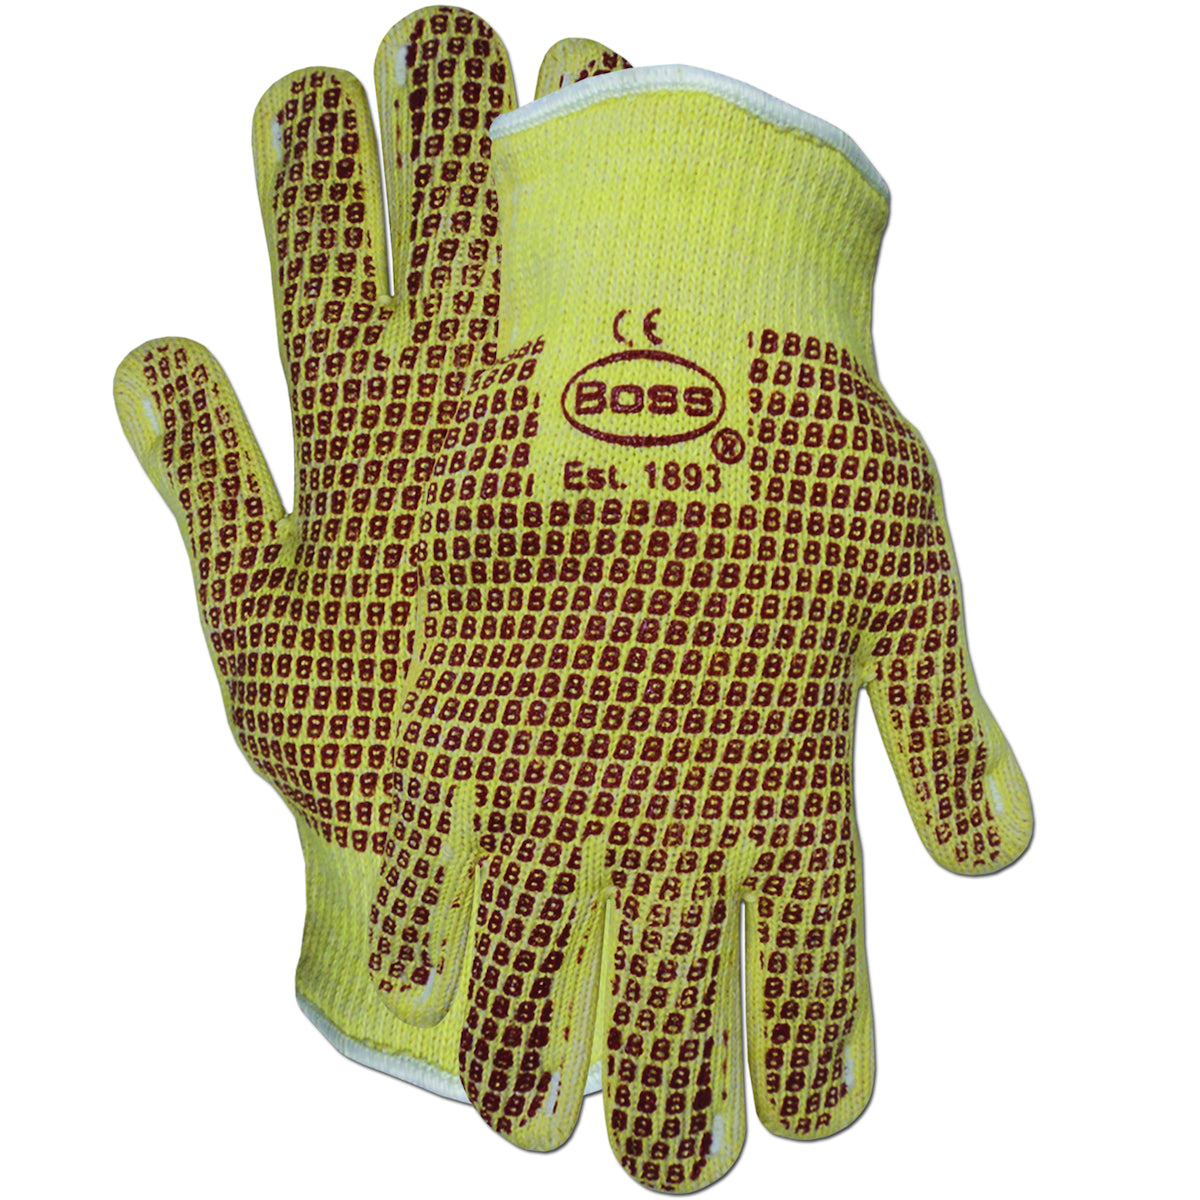 Boss 1TN4100KBM Aramid / Cotton Seamless Knit Hot Mill Glove with Cotton Liner and Double-Sided Nitrile Coating - Knitwrist